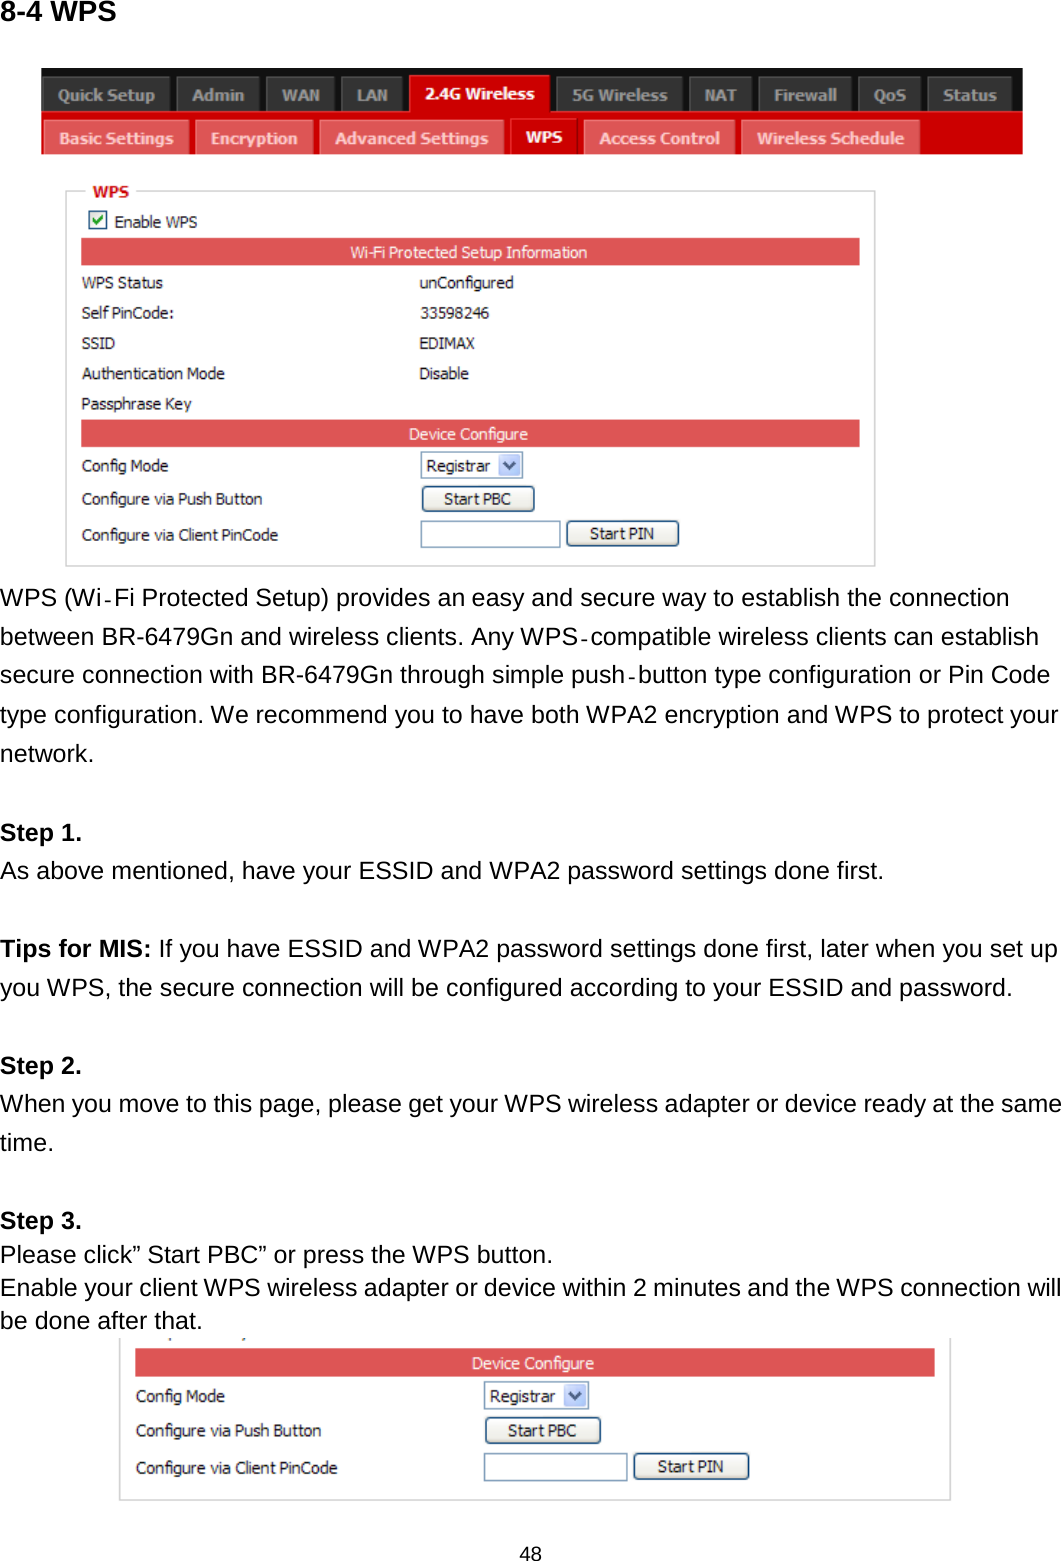 48  8-4 WPS    WPS (Wi‐Fi Protected Setup) provides an easy and secure way to establish the connection between BR-6479Gn and wireless clients. Any WPS‐compatible wireless clients can establish secure connection with BR-6479Gn through simple push‐button type configuration or Pin Code type configuration. We recommend you to have both WPA2 encryption and WPS to protect your network.  Step 1. As above mentioned, have your ESSID and WPA2 password settings done first.  Tips for MIS: If you have ESSID and WPA2 password settings done first, later when you set up you WPS, the secure connection will be configured according to your ESSID and password.   Step 2. When you move to this page, please get your WPS wireless adapter or device ready at the same time.  Step 3. Please click” Start PBC” or press the WPS button. Enable your client WPS wireless adapter or device within 2 minutes and the WPS connection will be done after that.  